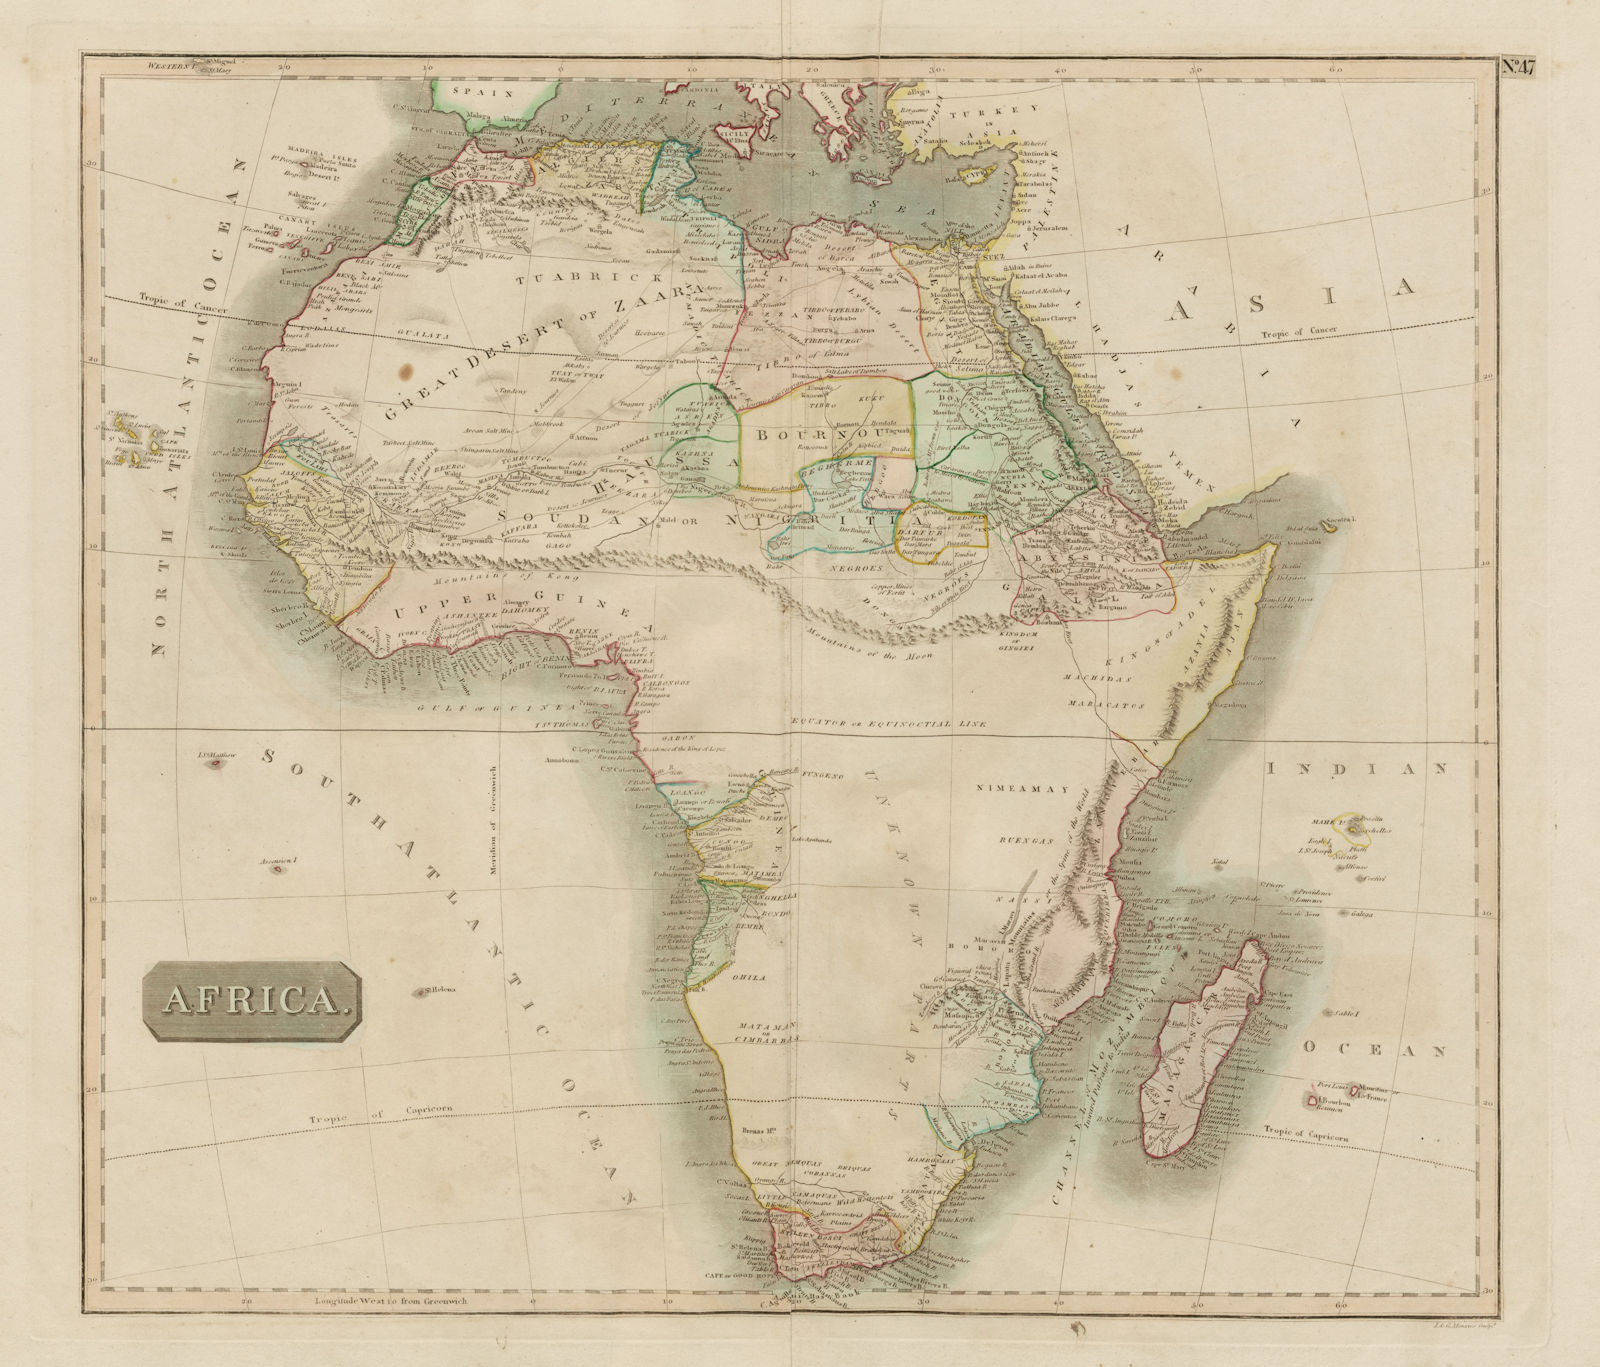 Pre-colonial Africa. Mountains of Kong/Moon. Caravan routes. THOMSON 1817 map